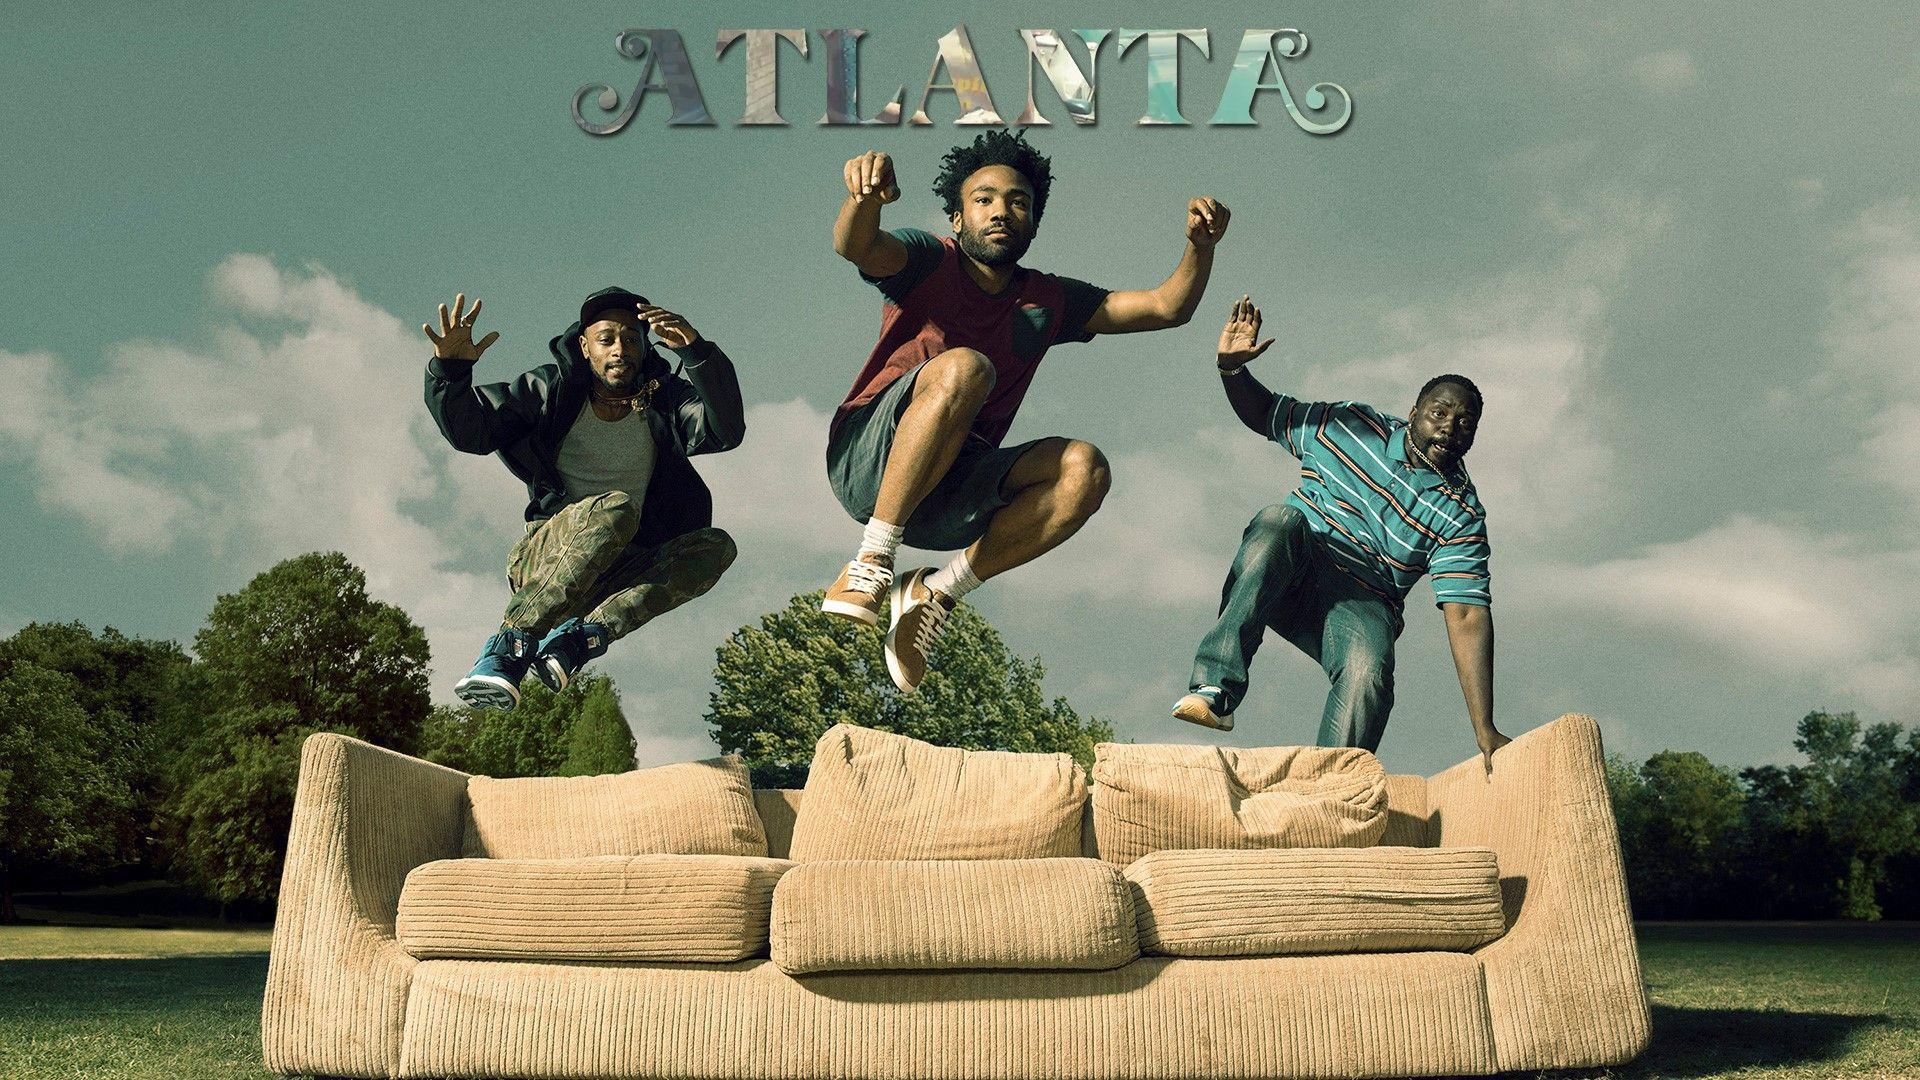 Couldn't find a decent 1080p Atlanta wallpaper, so I just added